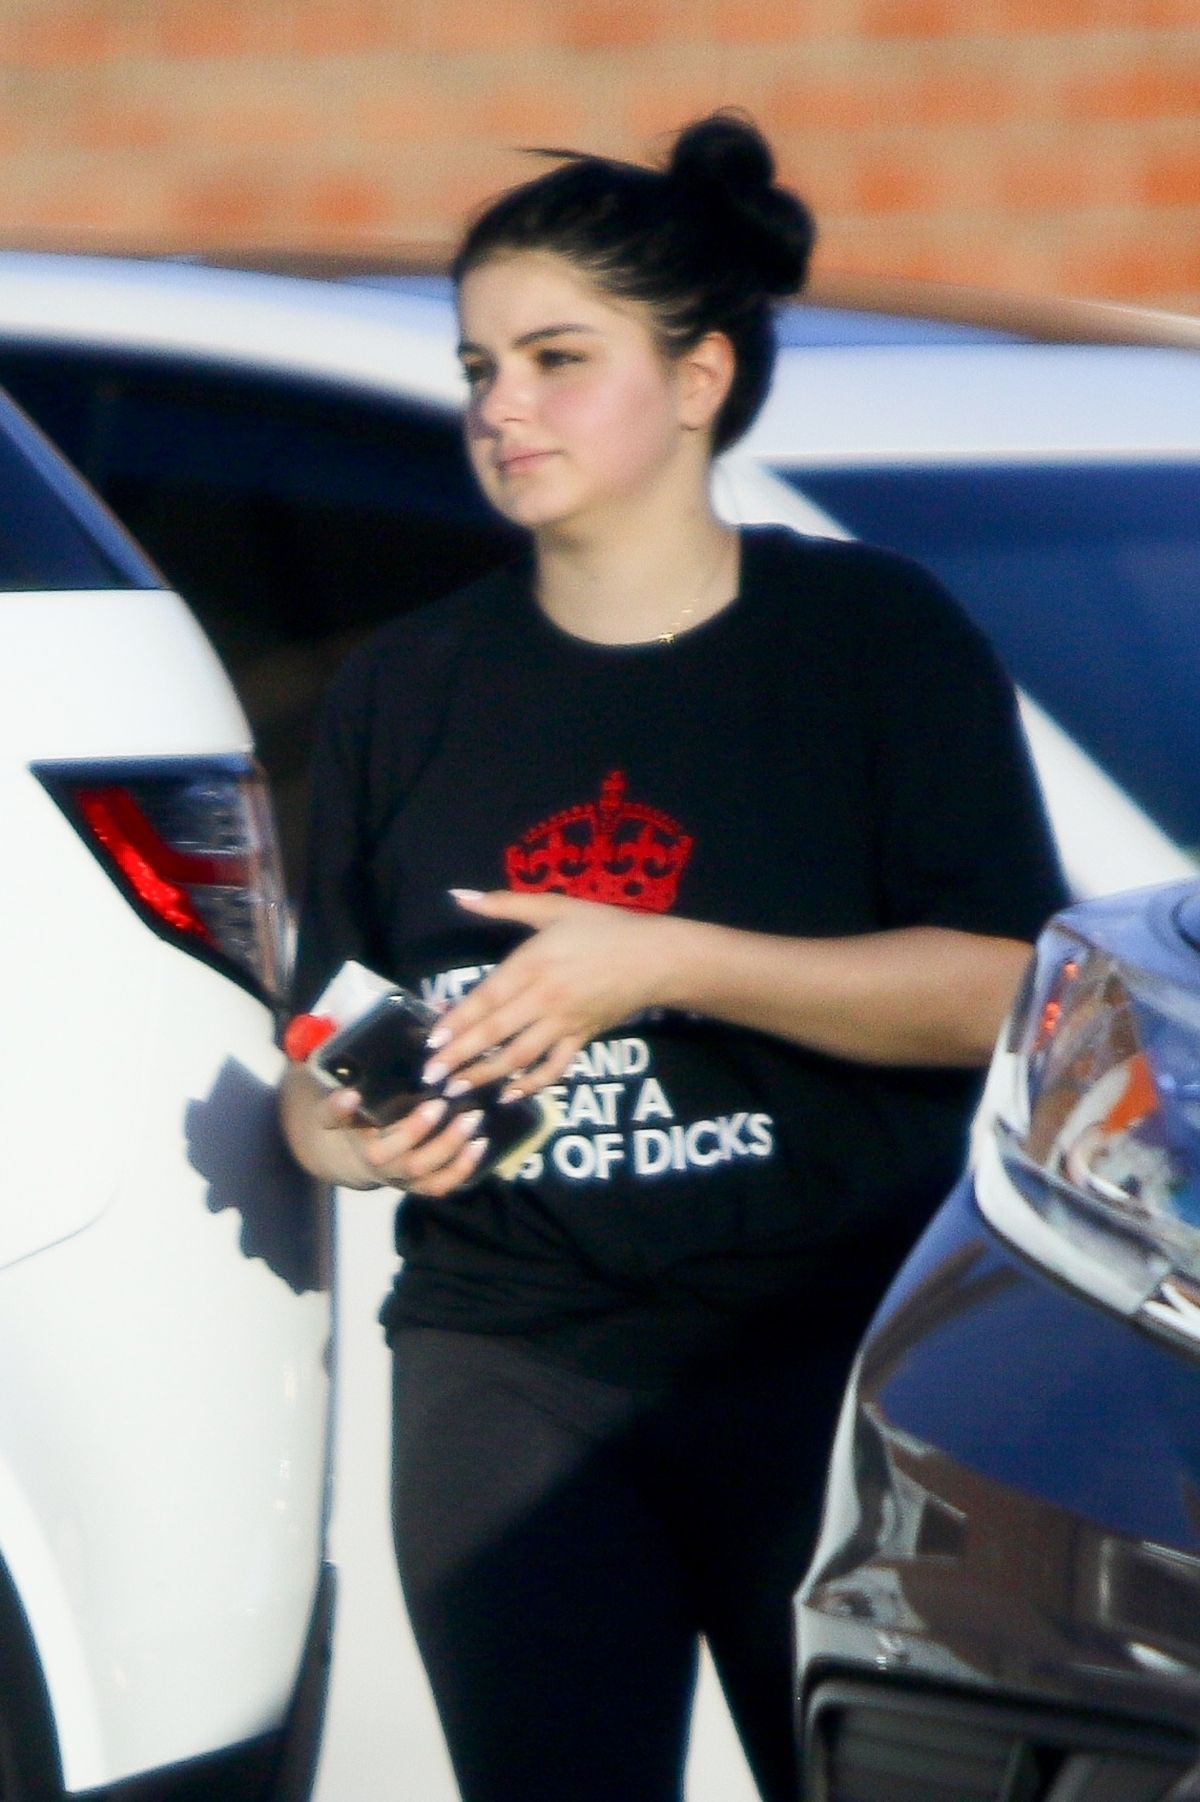 ariel-winter-out-and-about-in-los-angeles-07-02-2018-9.jpg